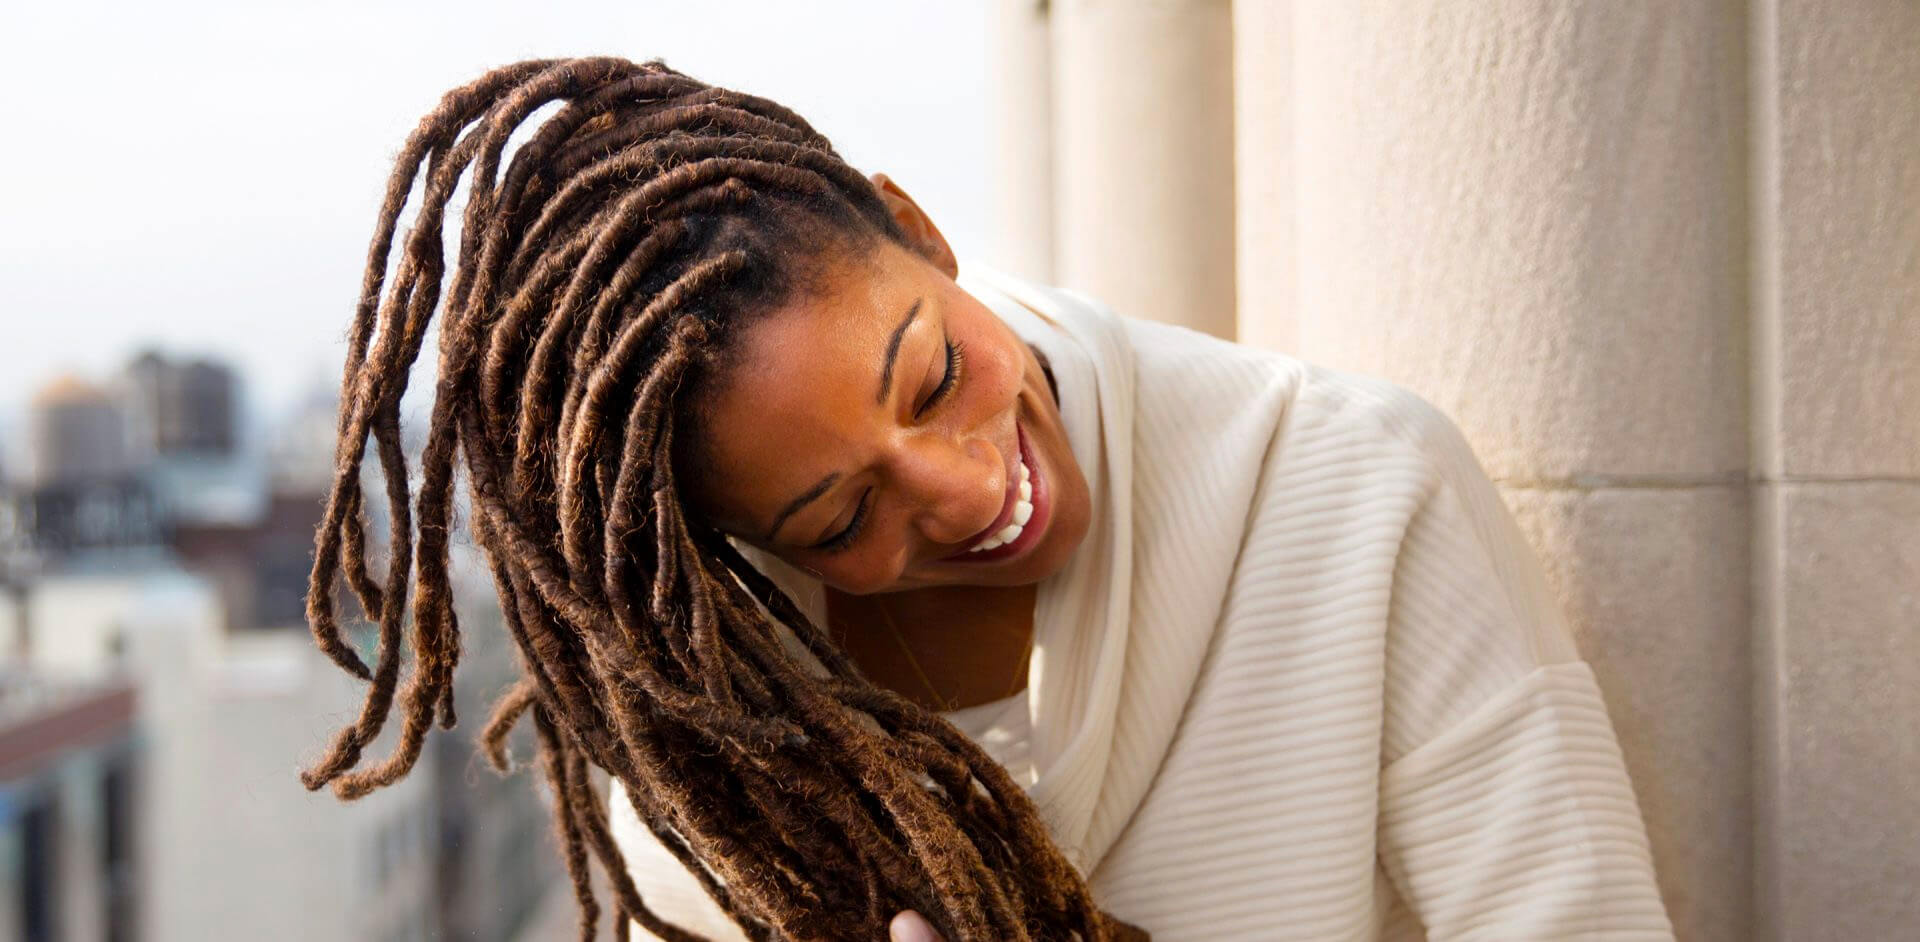 Do you need to use conditioner for locs?